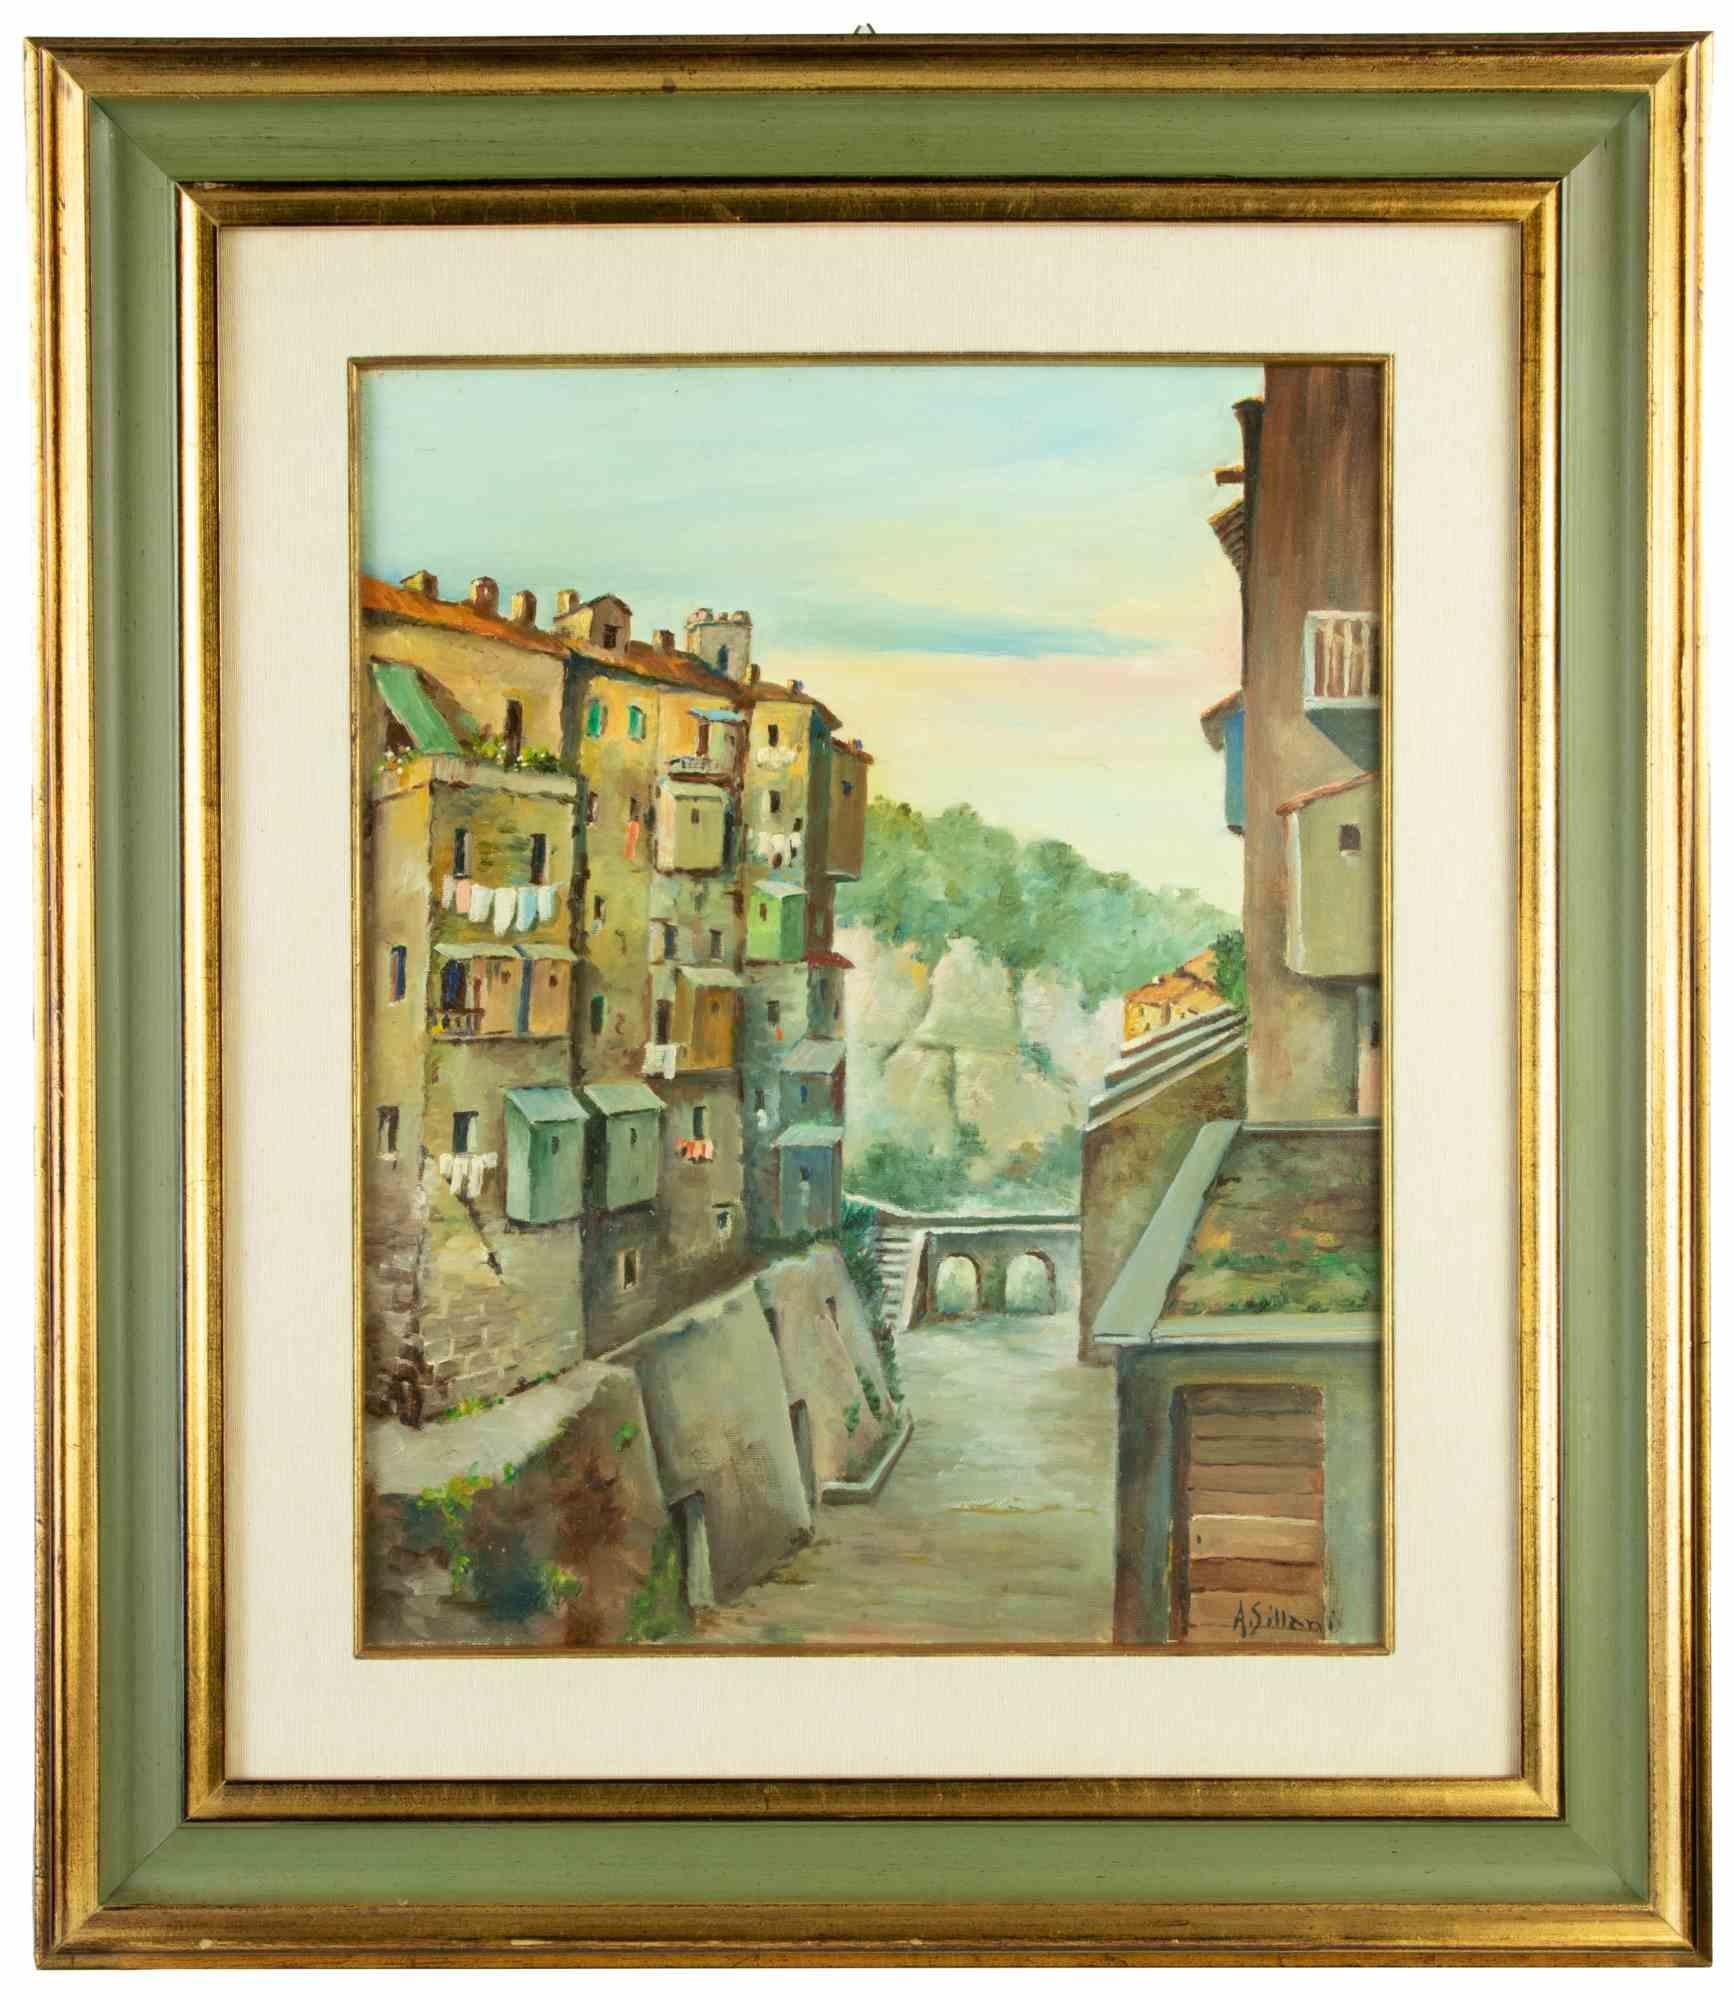 Landscape is an artwork by Alberto Sillani, realized in the mid-20thCentury. 

Oil on Canvas

49 x 39.5 cm ; 75 x 65 cm with frame.

Handsigned in the lower margin.

Good conditions